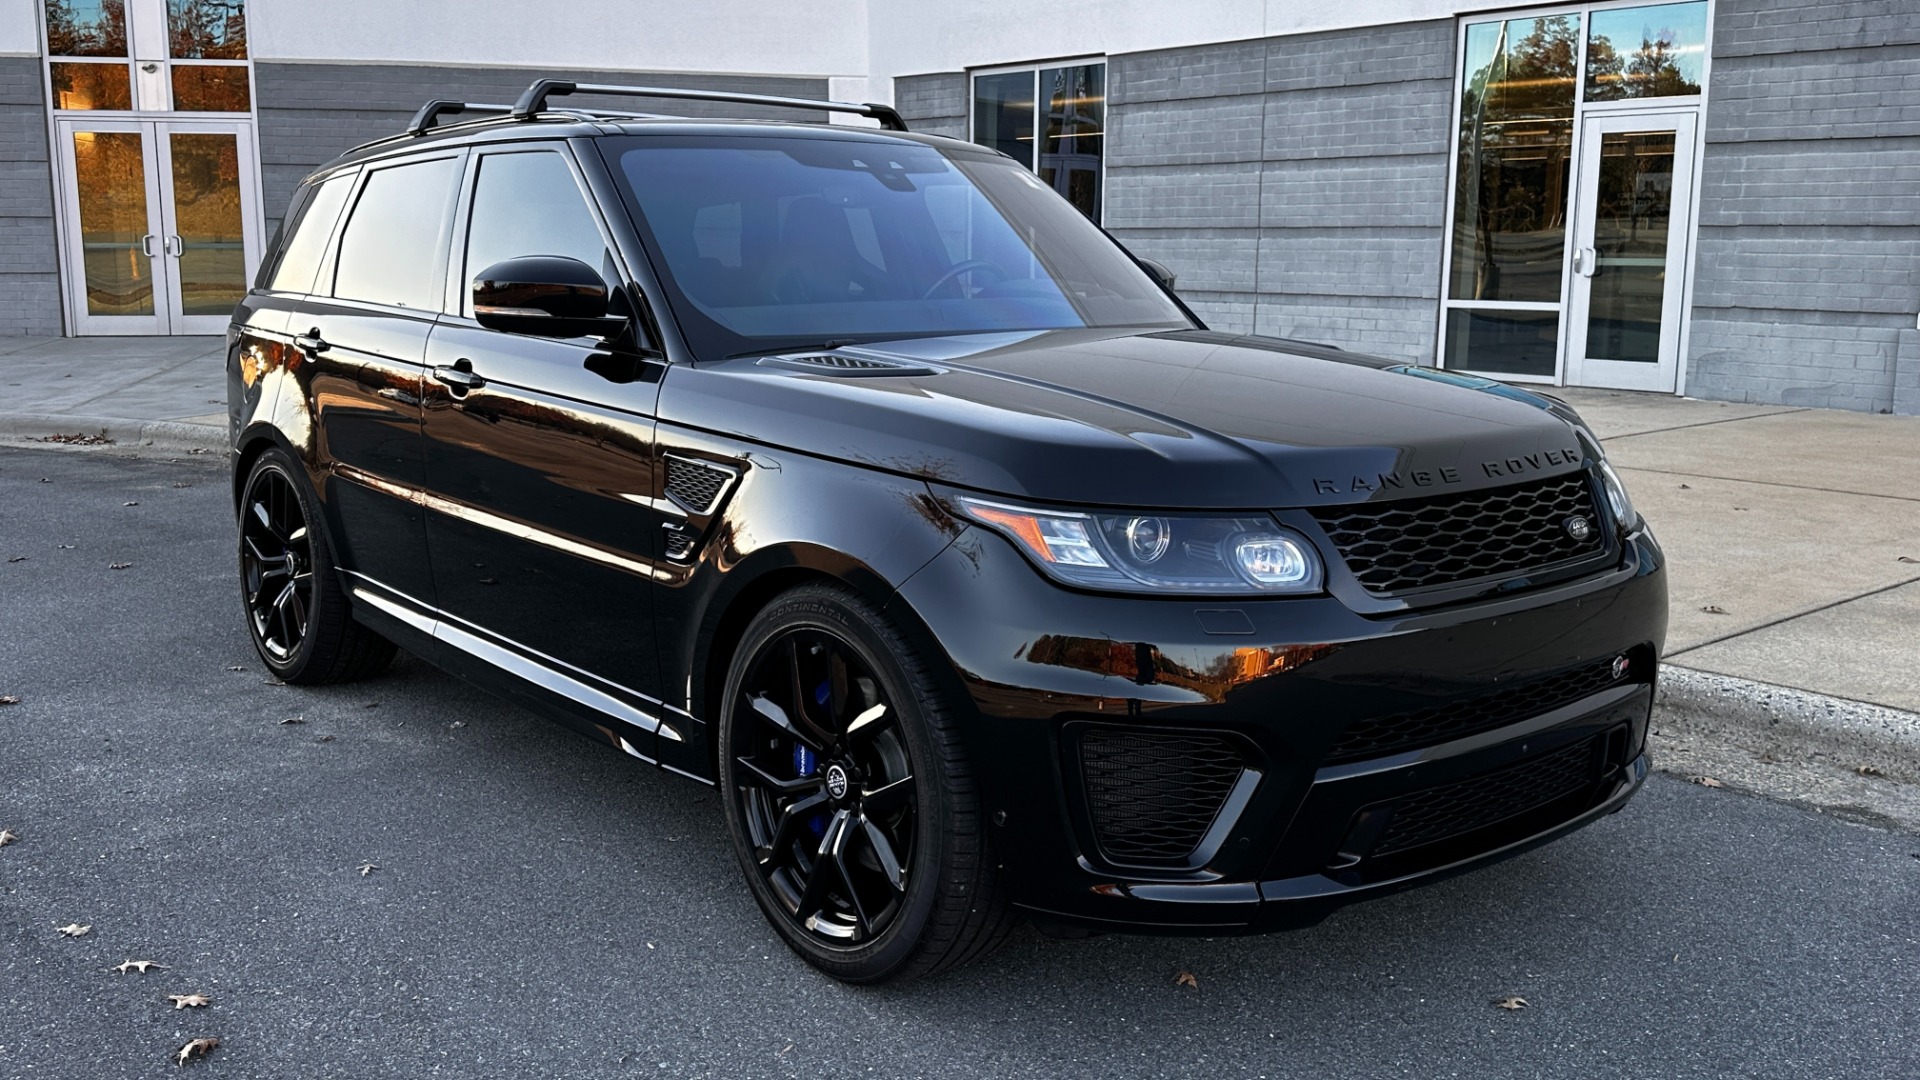 Used 2017 Land Rover Range Rover Sport SVR / DRIVE PRO PACKAGE / MERIDIAN SURROUND SOUND / SUPERCHARGED V8 / PANOR for sale $63,999 at Formula Imports in Charlotte NC 28227 4